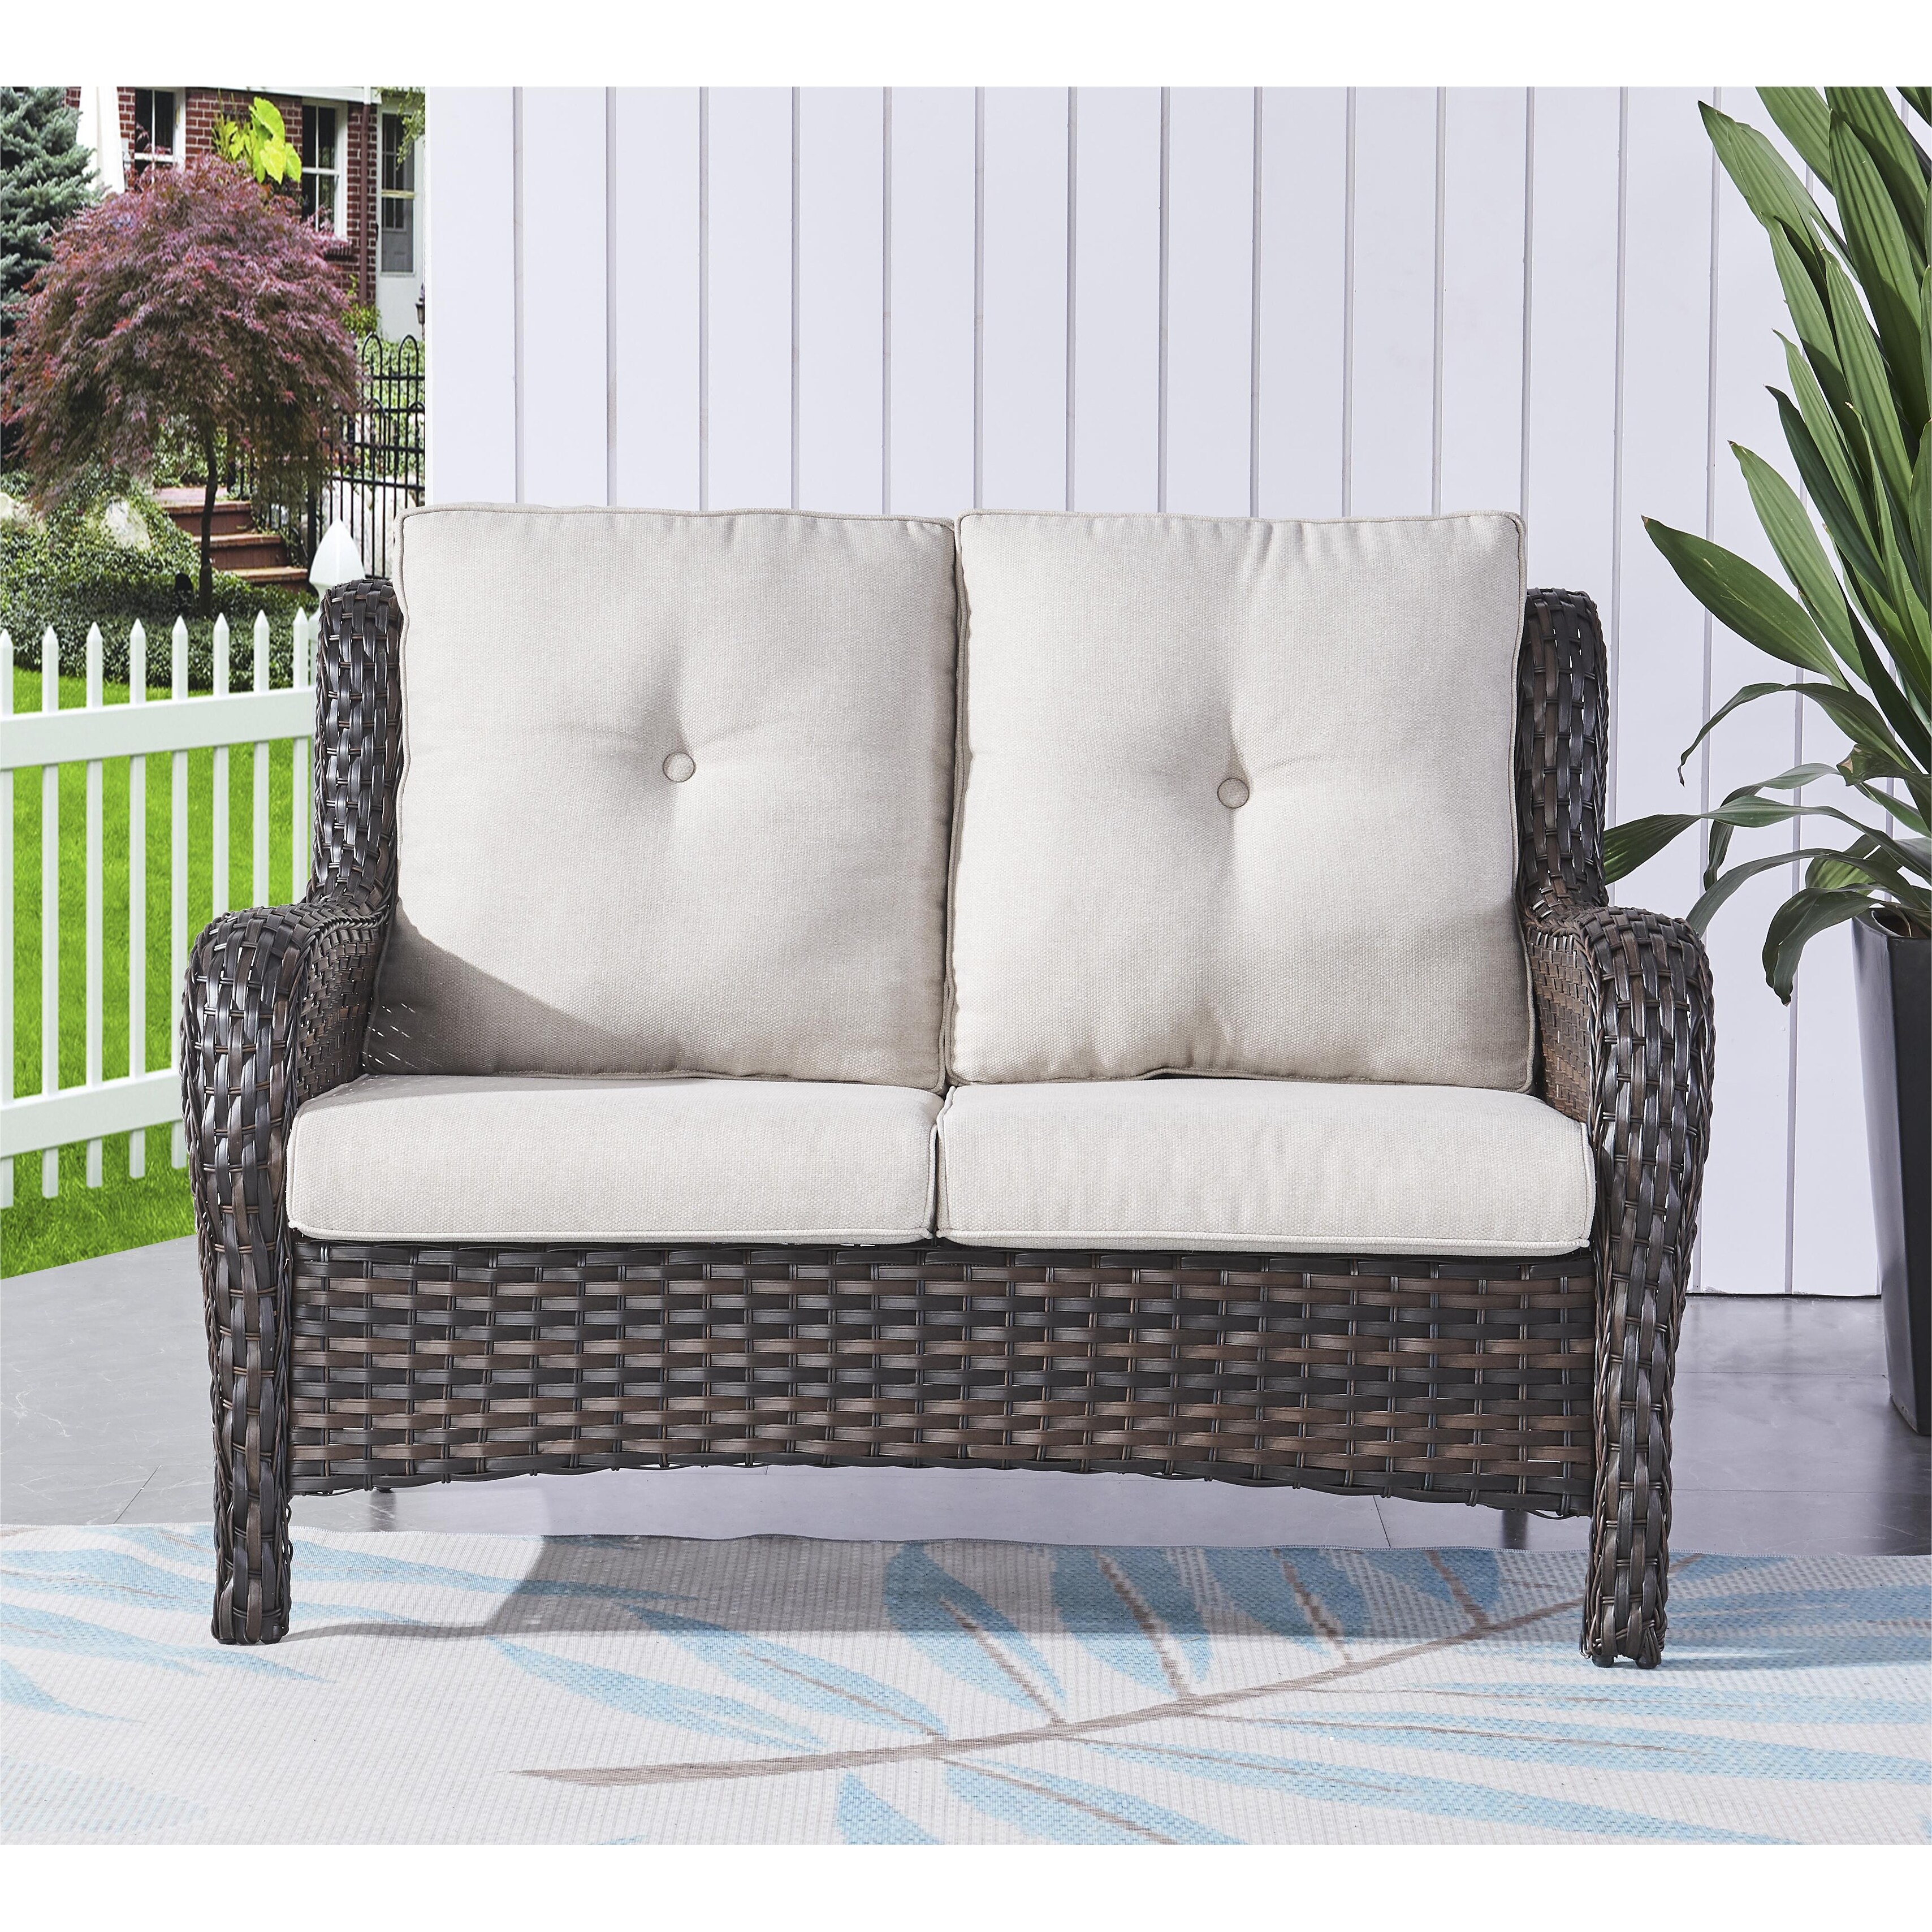 Pocassy Outdoor Patio Loveseat Sofa, Wide and Deep Seating Brown/Beige - image 1 of 5